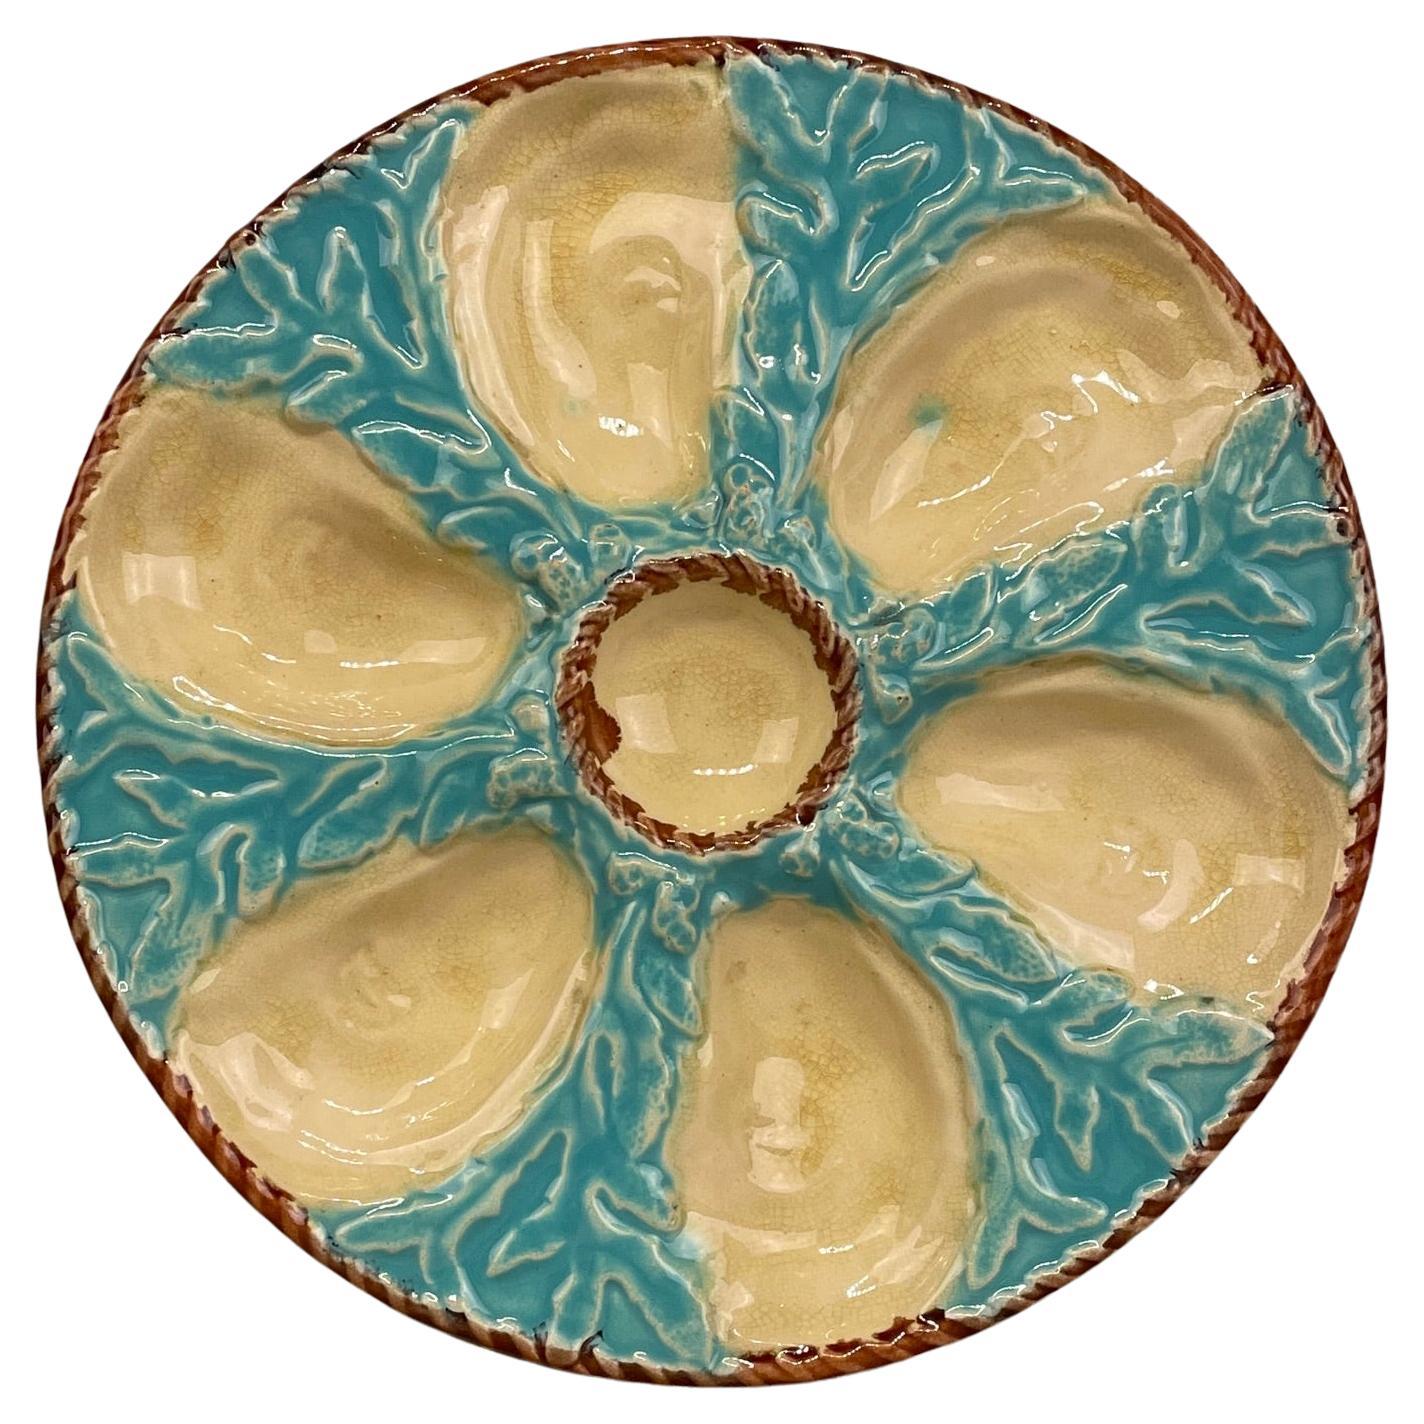 19th C. English Majolica Seaweed Oyster Plate, S. Fielding & Co